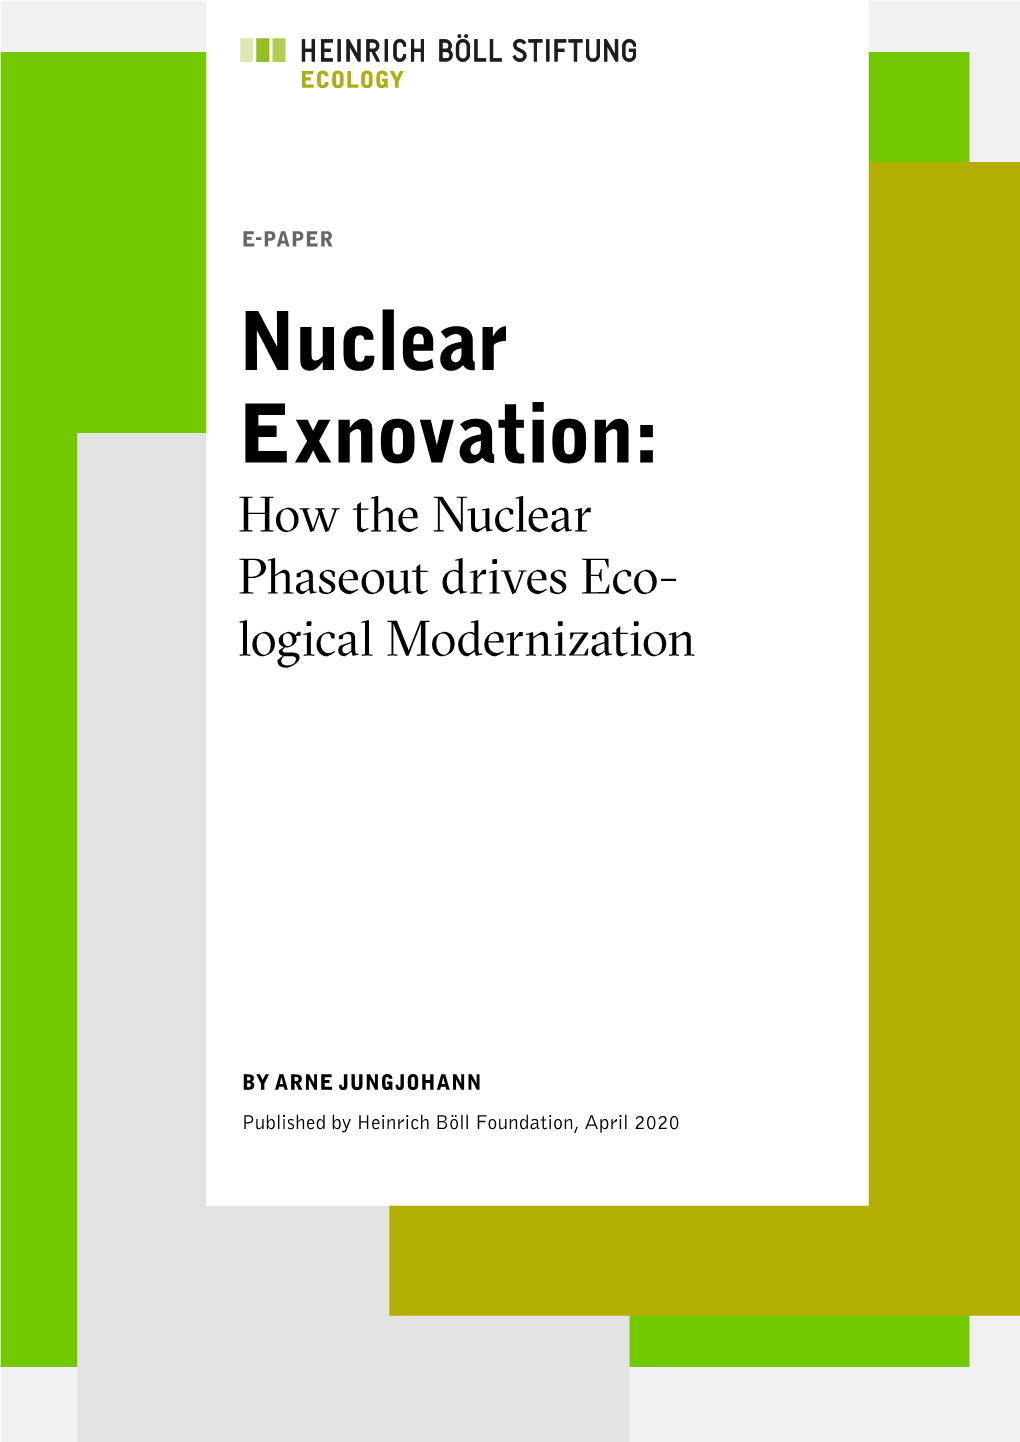 Nuclear Exnovation: How the Nuclear Phaseout Drives Eco- Logical Modernization